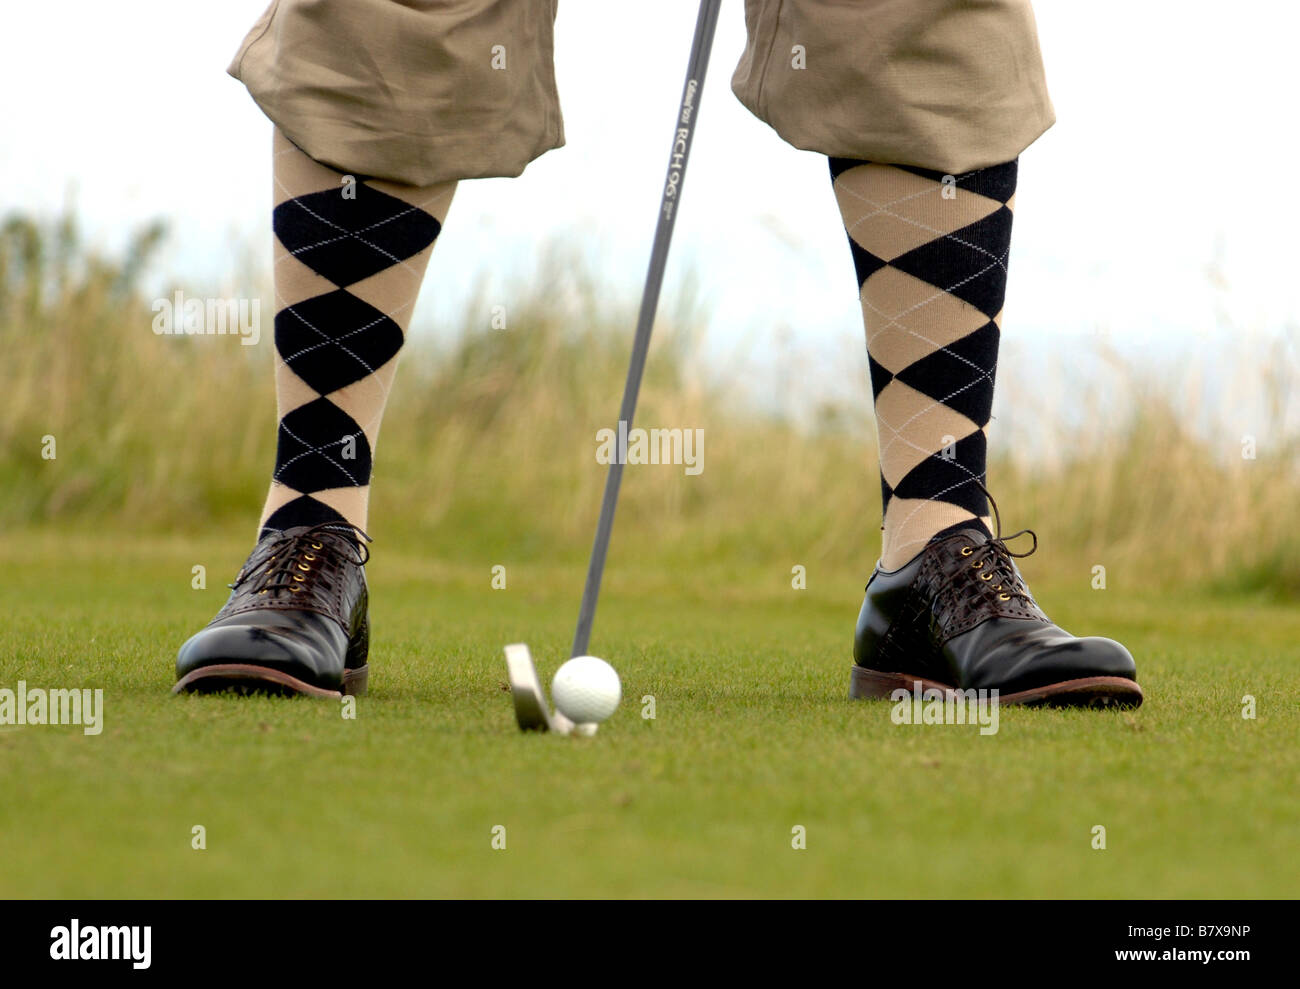 Man gets ready to strike a golf ball wearing plus fours Stock Photo